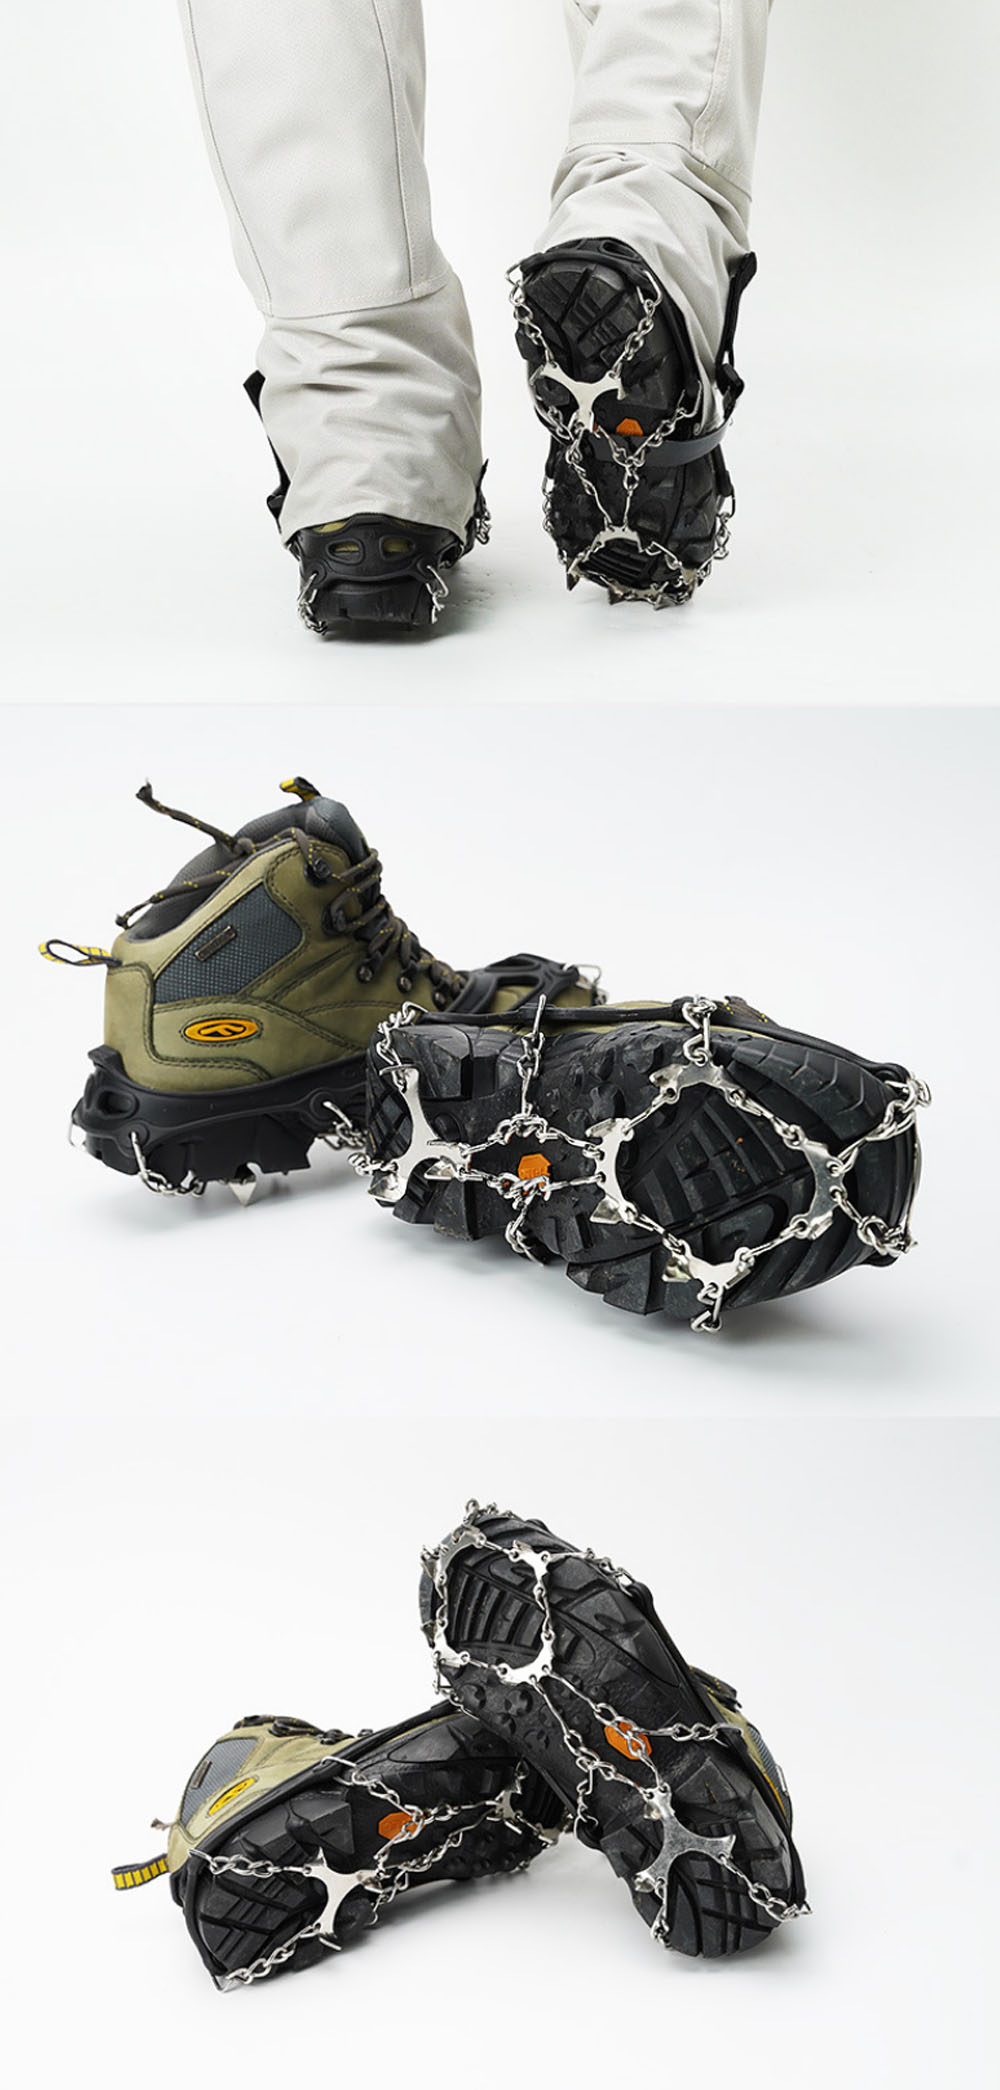 AUTO-12-teeth-Ice-Grip-Stainless-Steel-Welding-Chain-Crampons-Ice-Cleats-Non-slip-Shoe-Cover-for-Cam-1776147-4